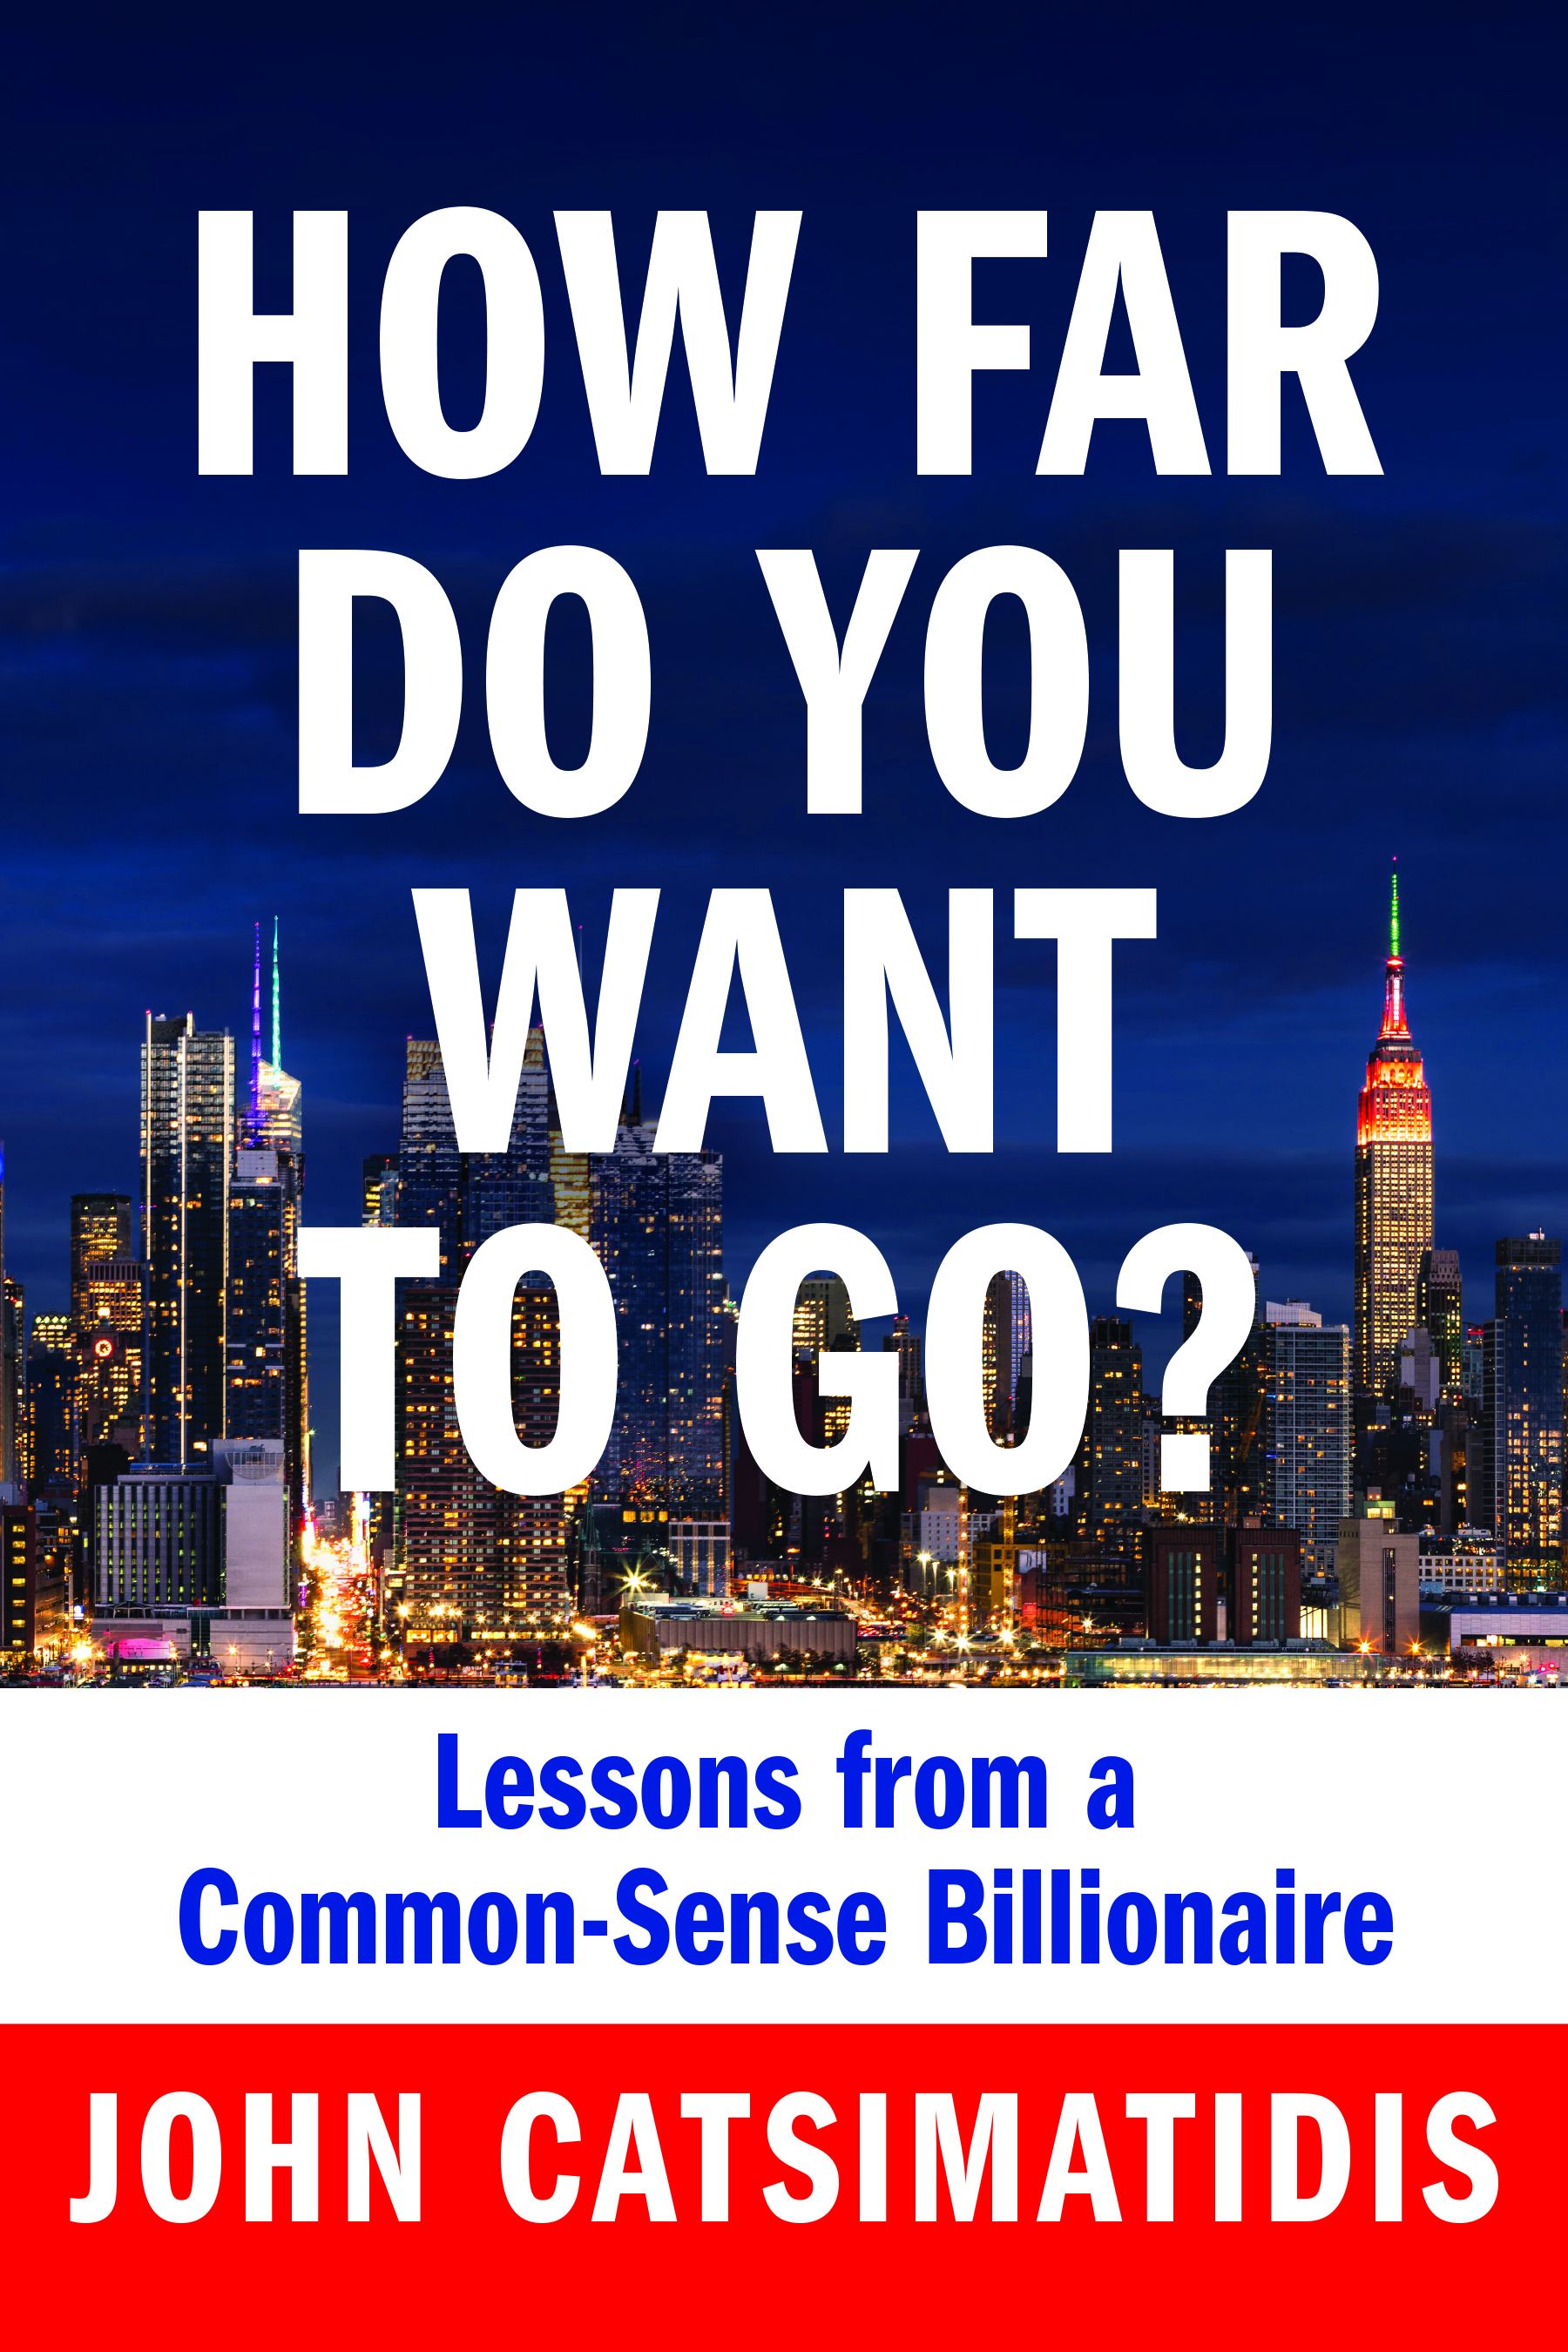 How Far Do You Want To Go: Lessons from a Common-Sense Billionaire